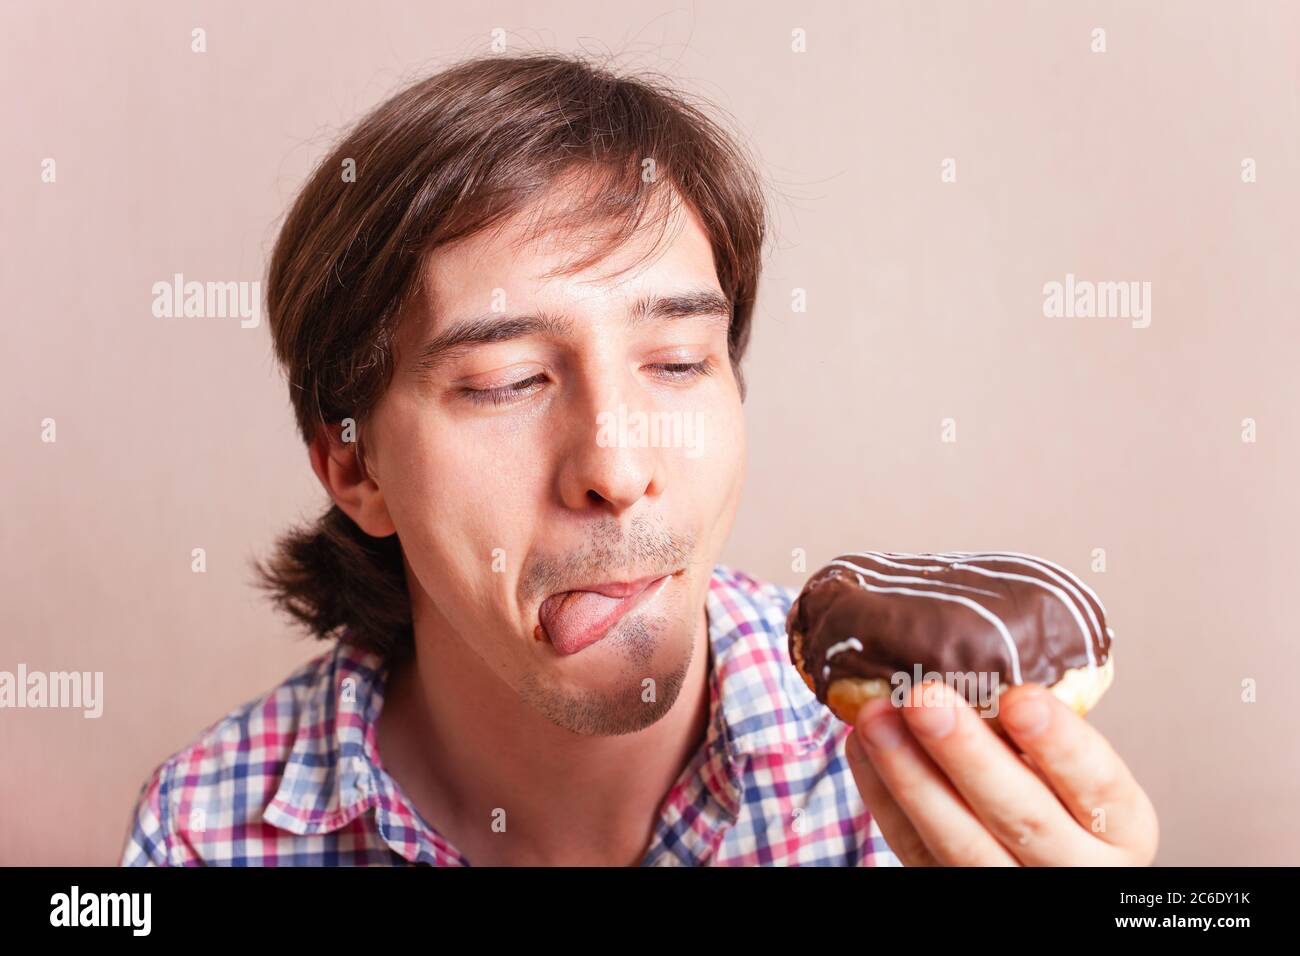 A man eats a doughnut and licks, a very funny photo on a pink background. Empty space for text. A man loves sweets chocolate. World Chocolate Day stoc Stock Photo